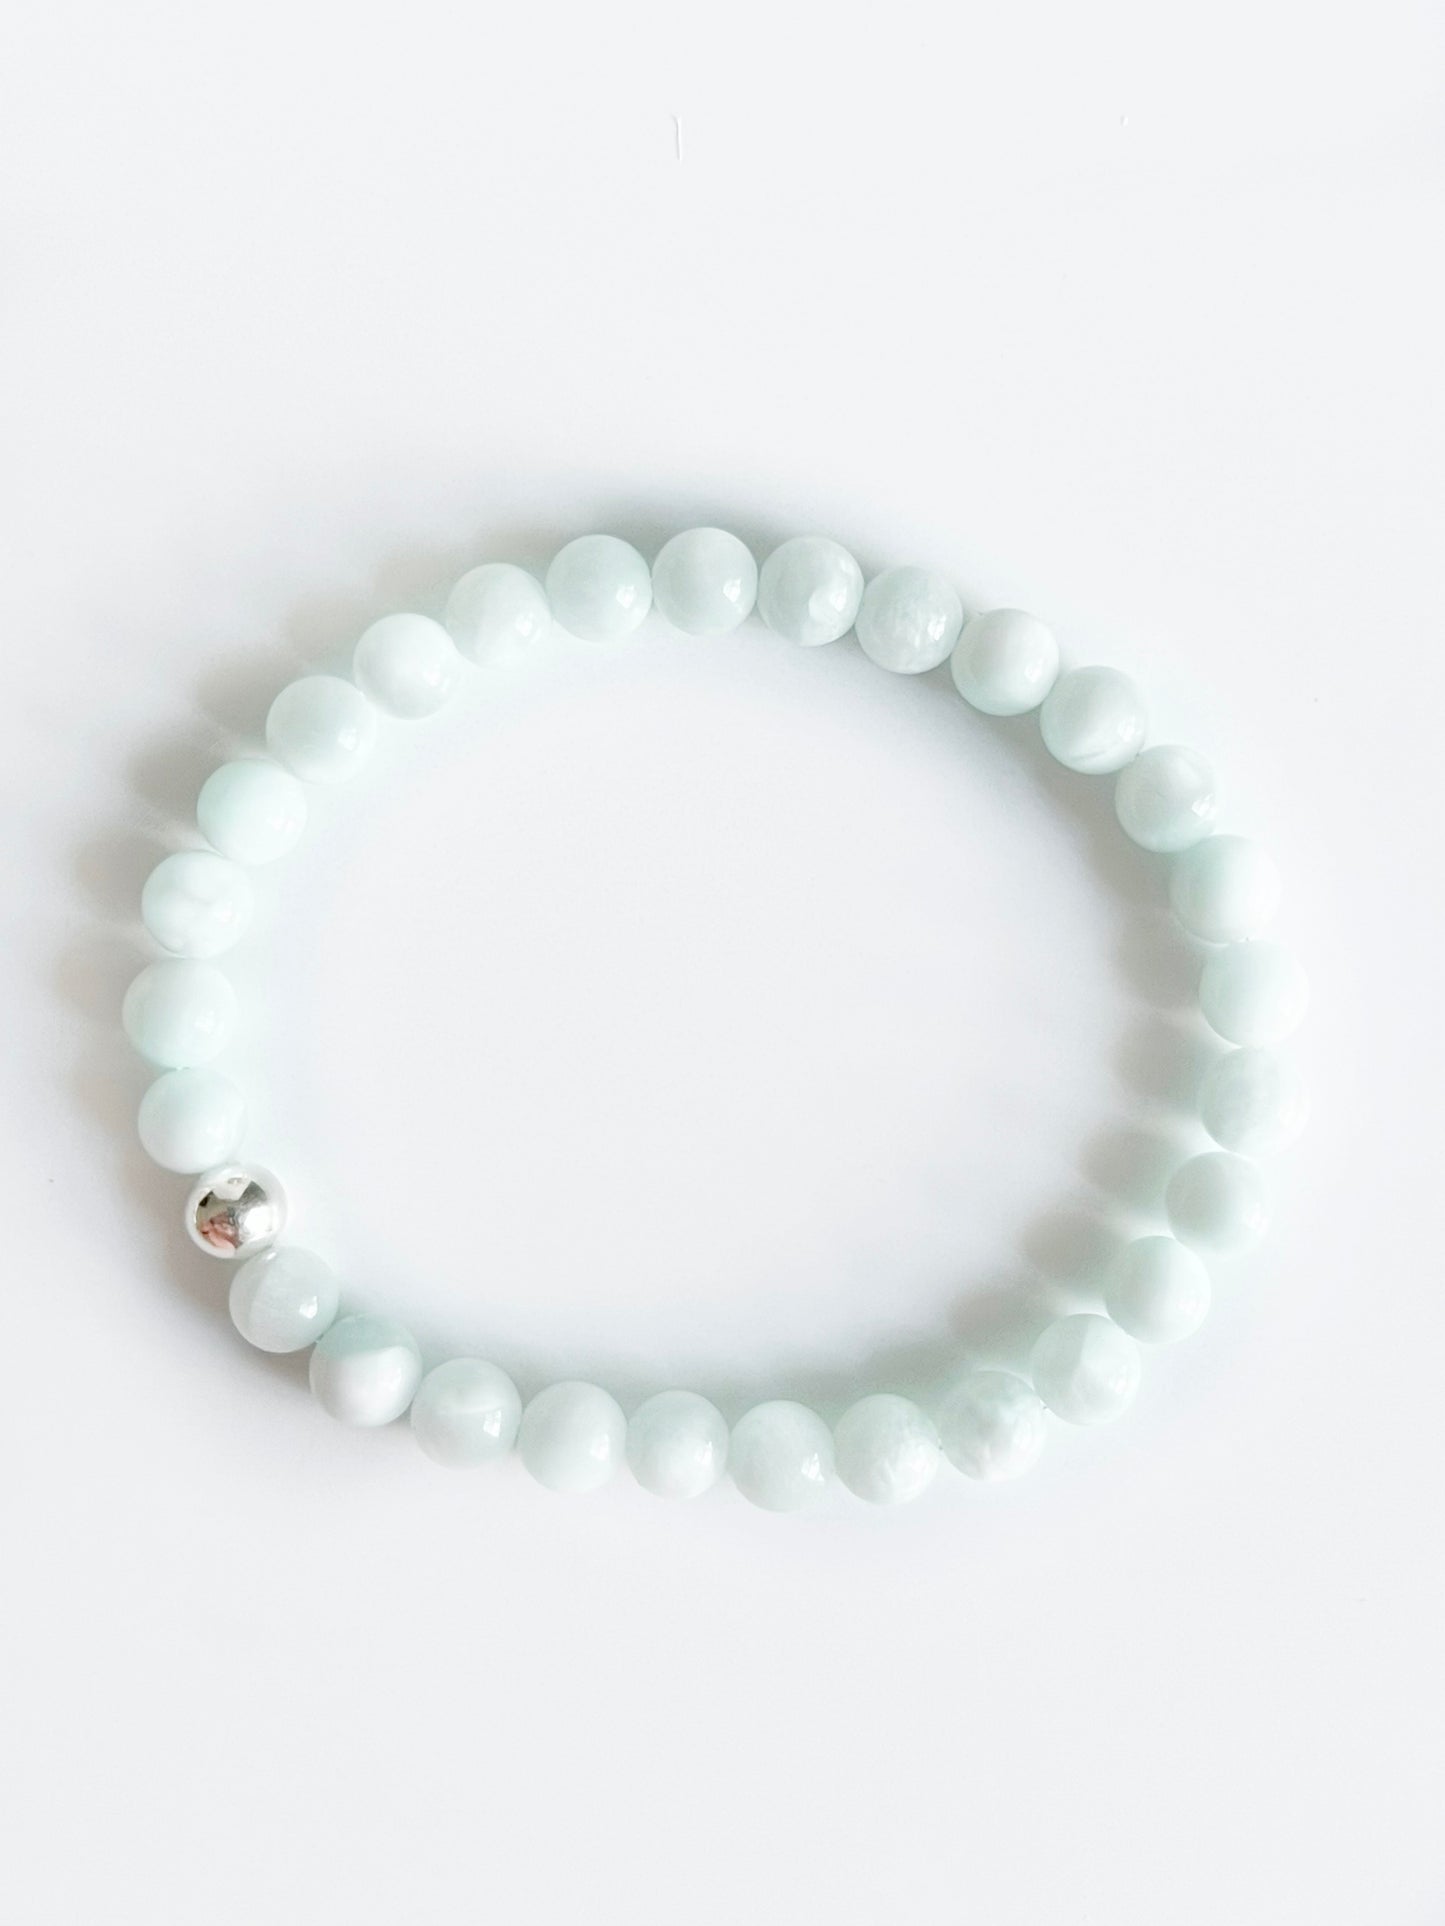 Simple modern green moonstone stretch bracelet with one sterling silver bead